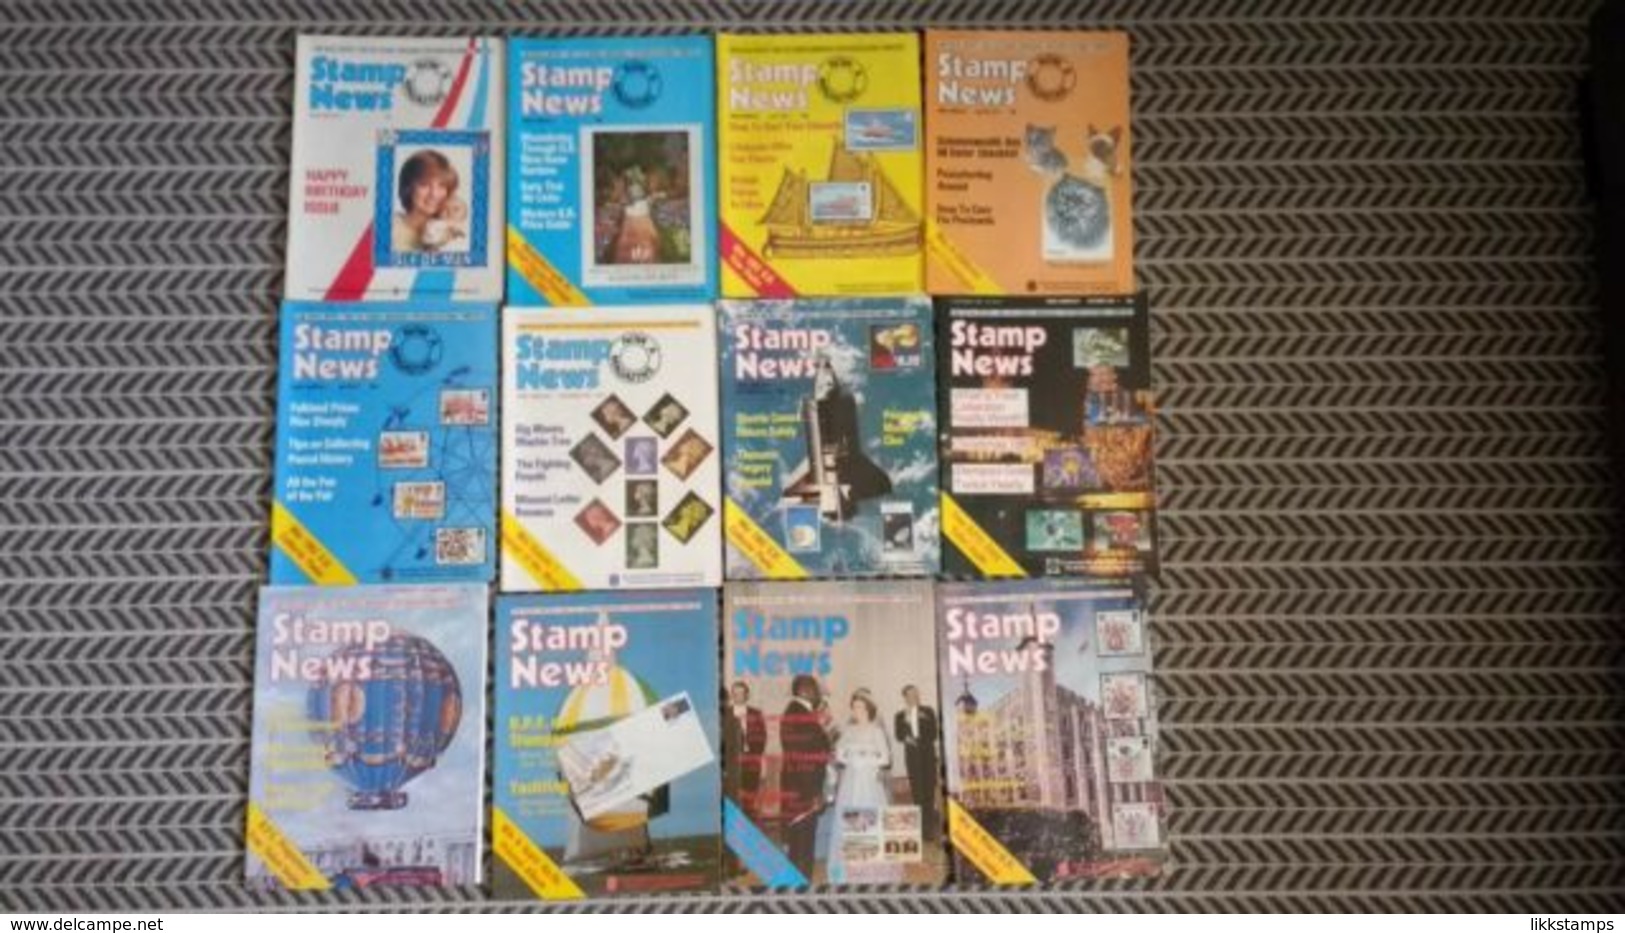 STAMP NEWS MAGAZINE 22nd JUNE 1983 TO 20th DECEMBER 1983 (VOLUME 3 - 1 TO 3 - 12) #L0014 - English (from 1941)